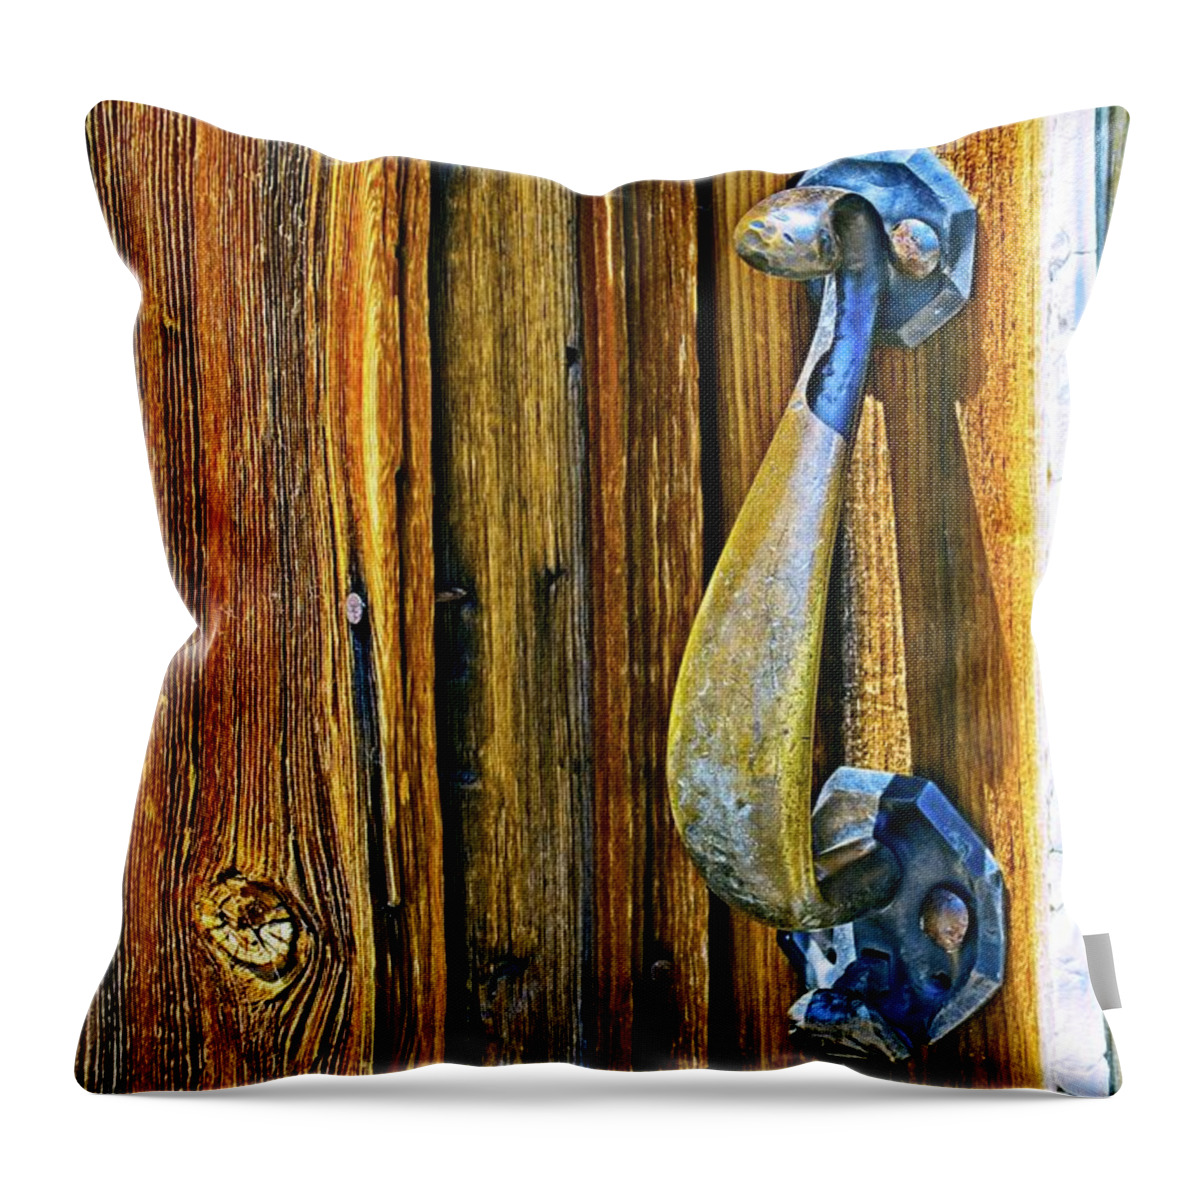 Ghost Town Throw Pillow featuring the photograph Handle From The Past by David Desautel